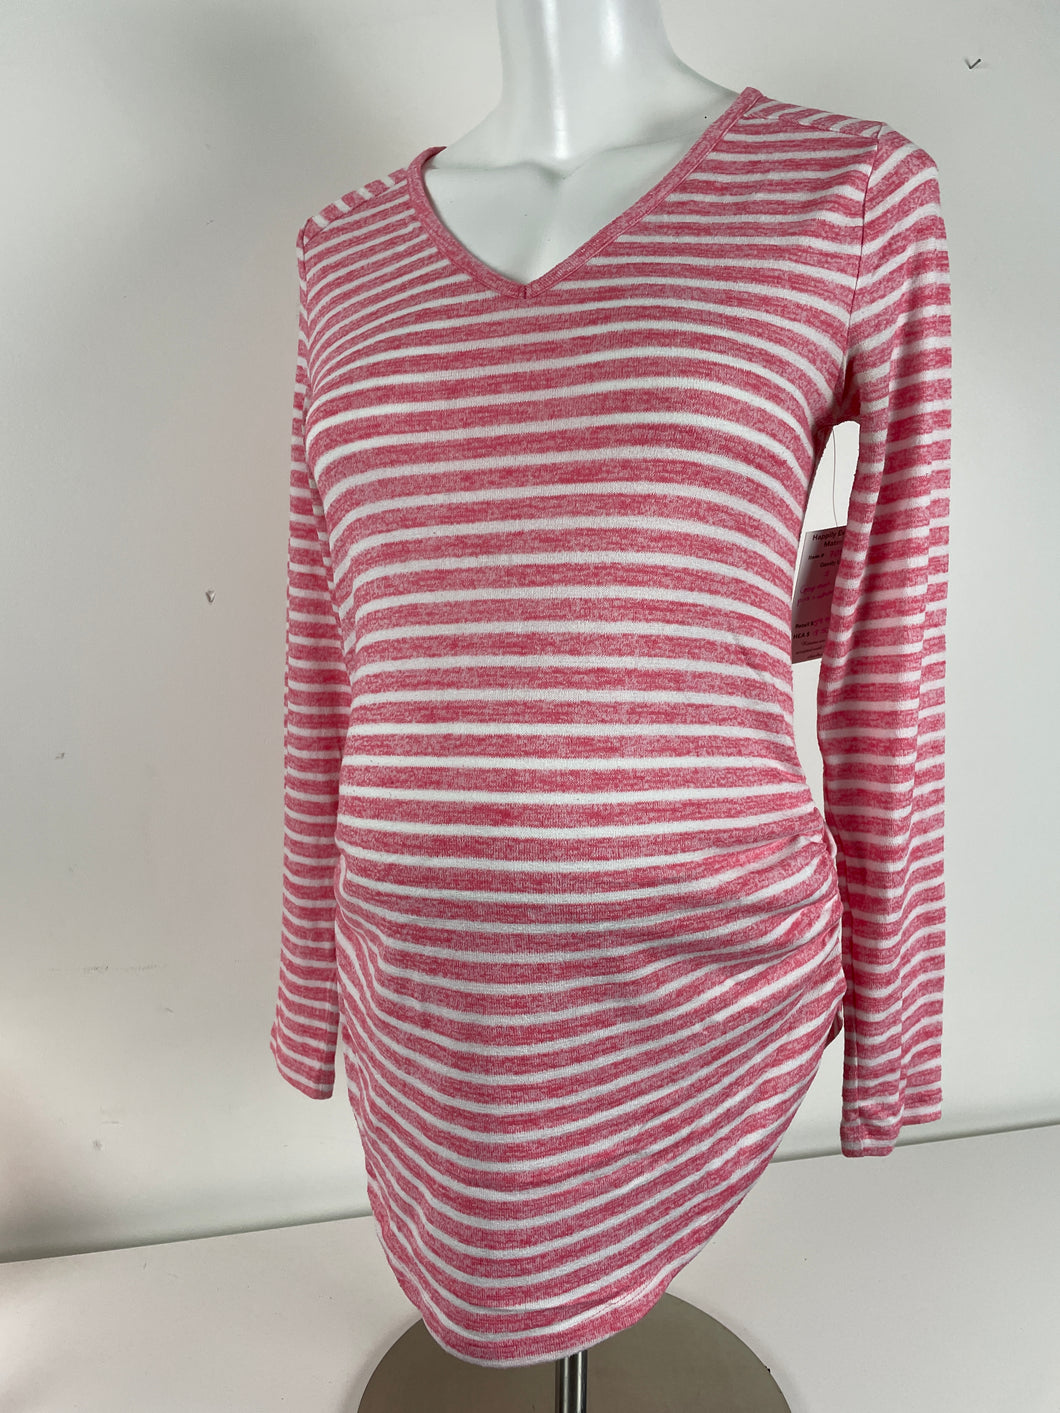 CLEARANCE S Gap Maternity Sweater in Pink & White Stripe